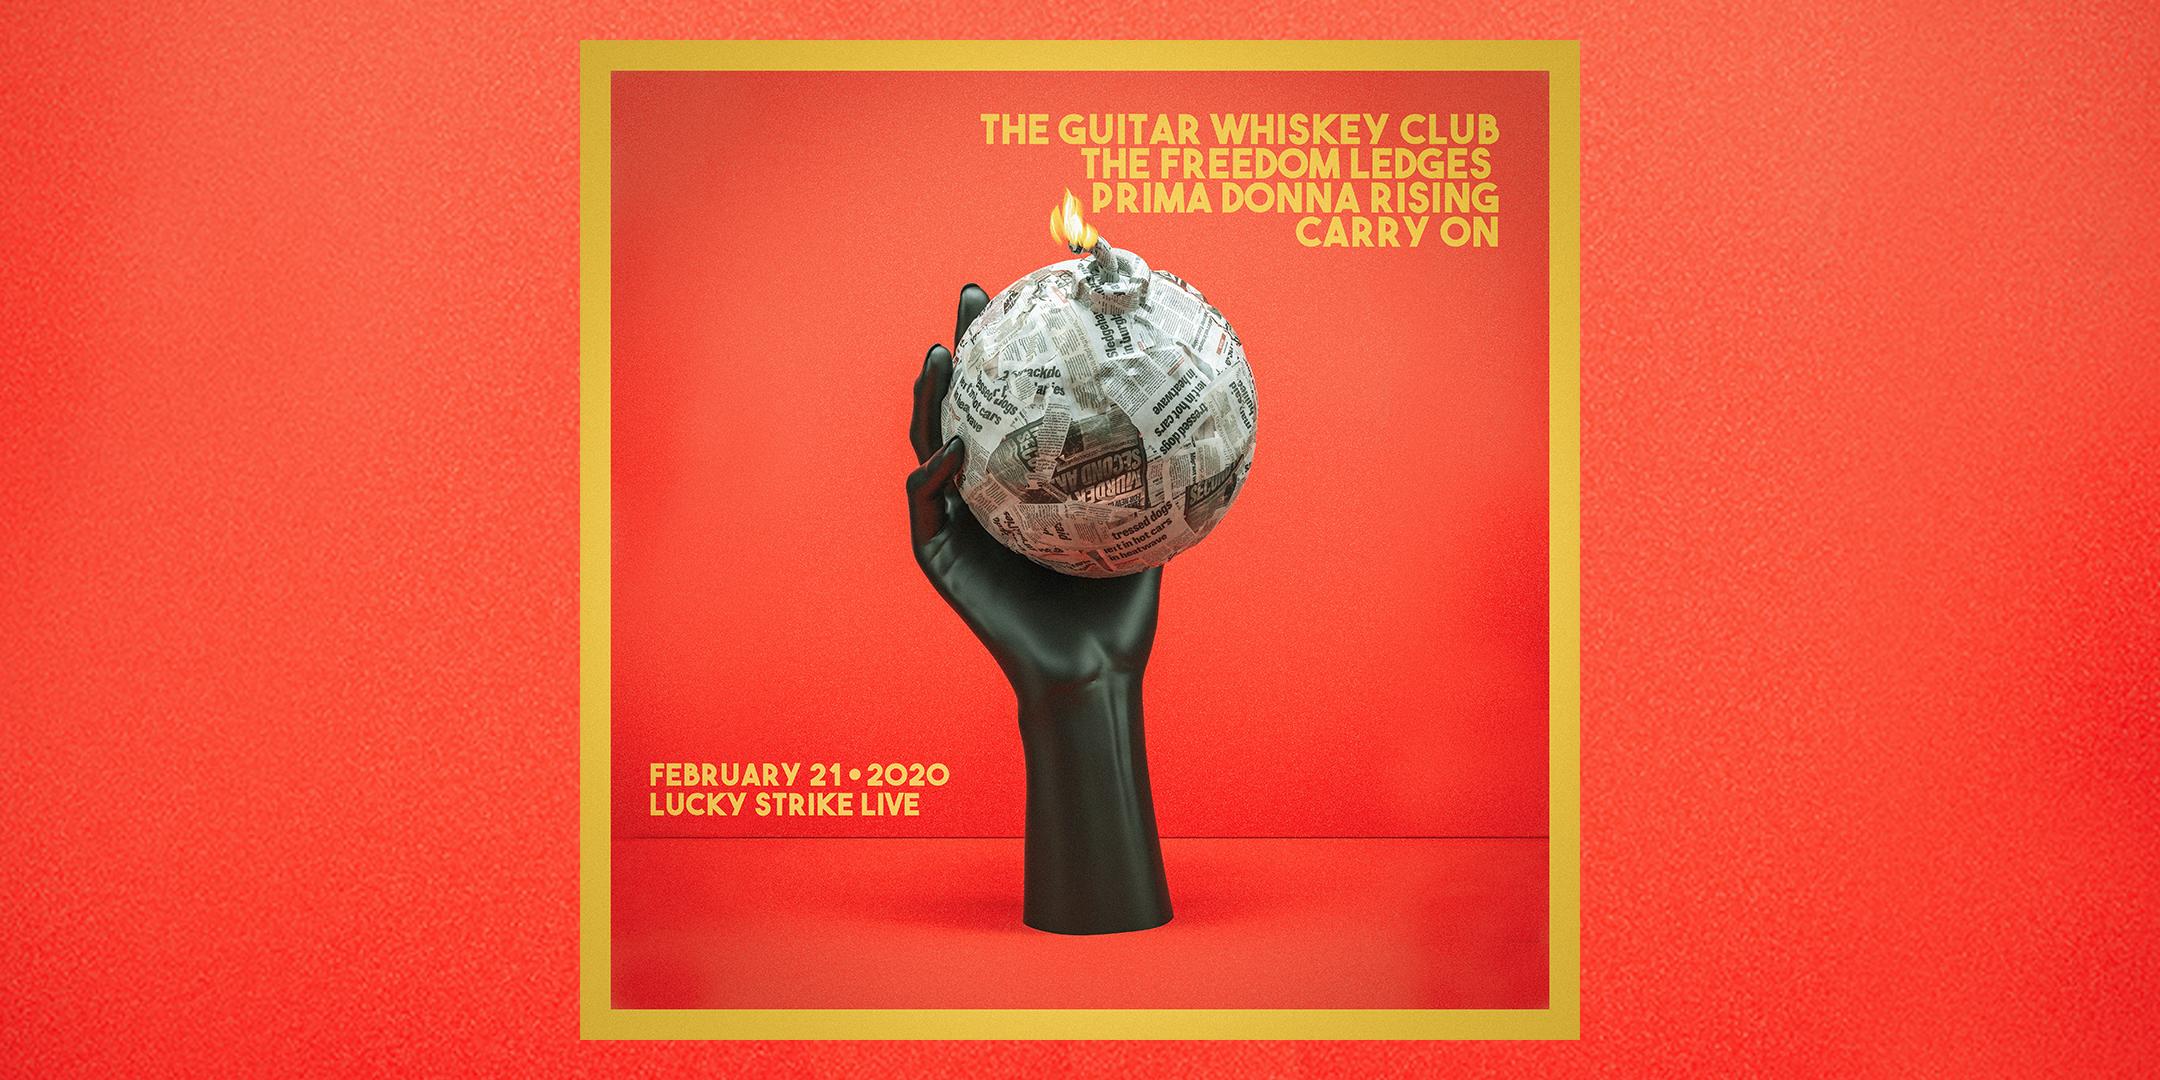 THE GUITAR AND WHISKEY CLUB AT LUCKY STRIKE LIVE